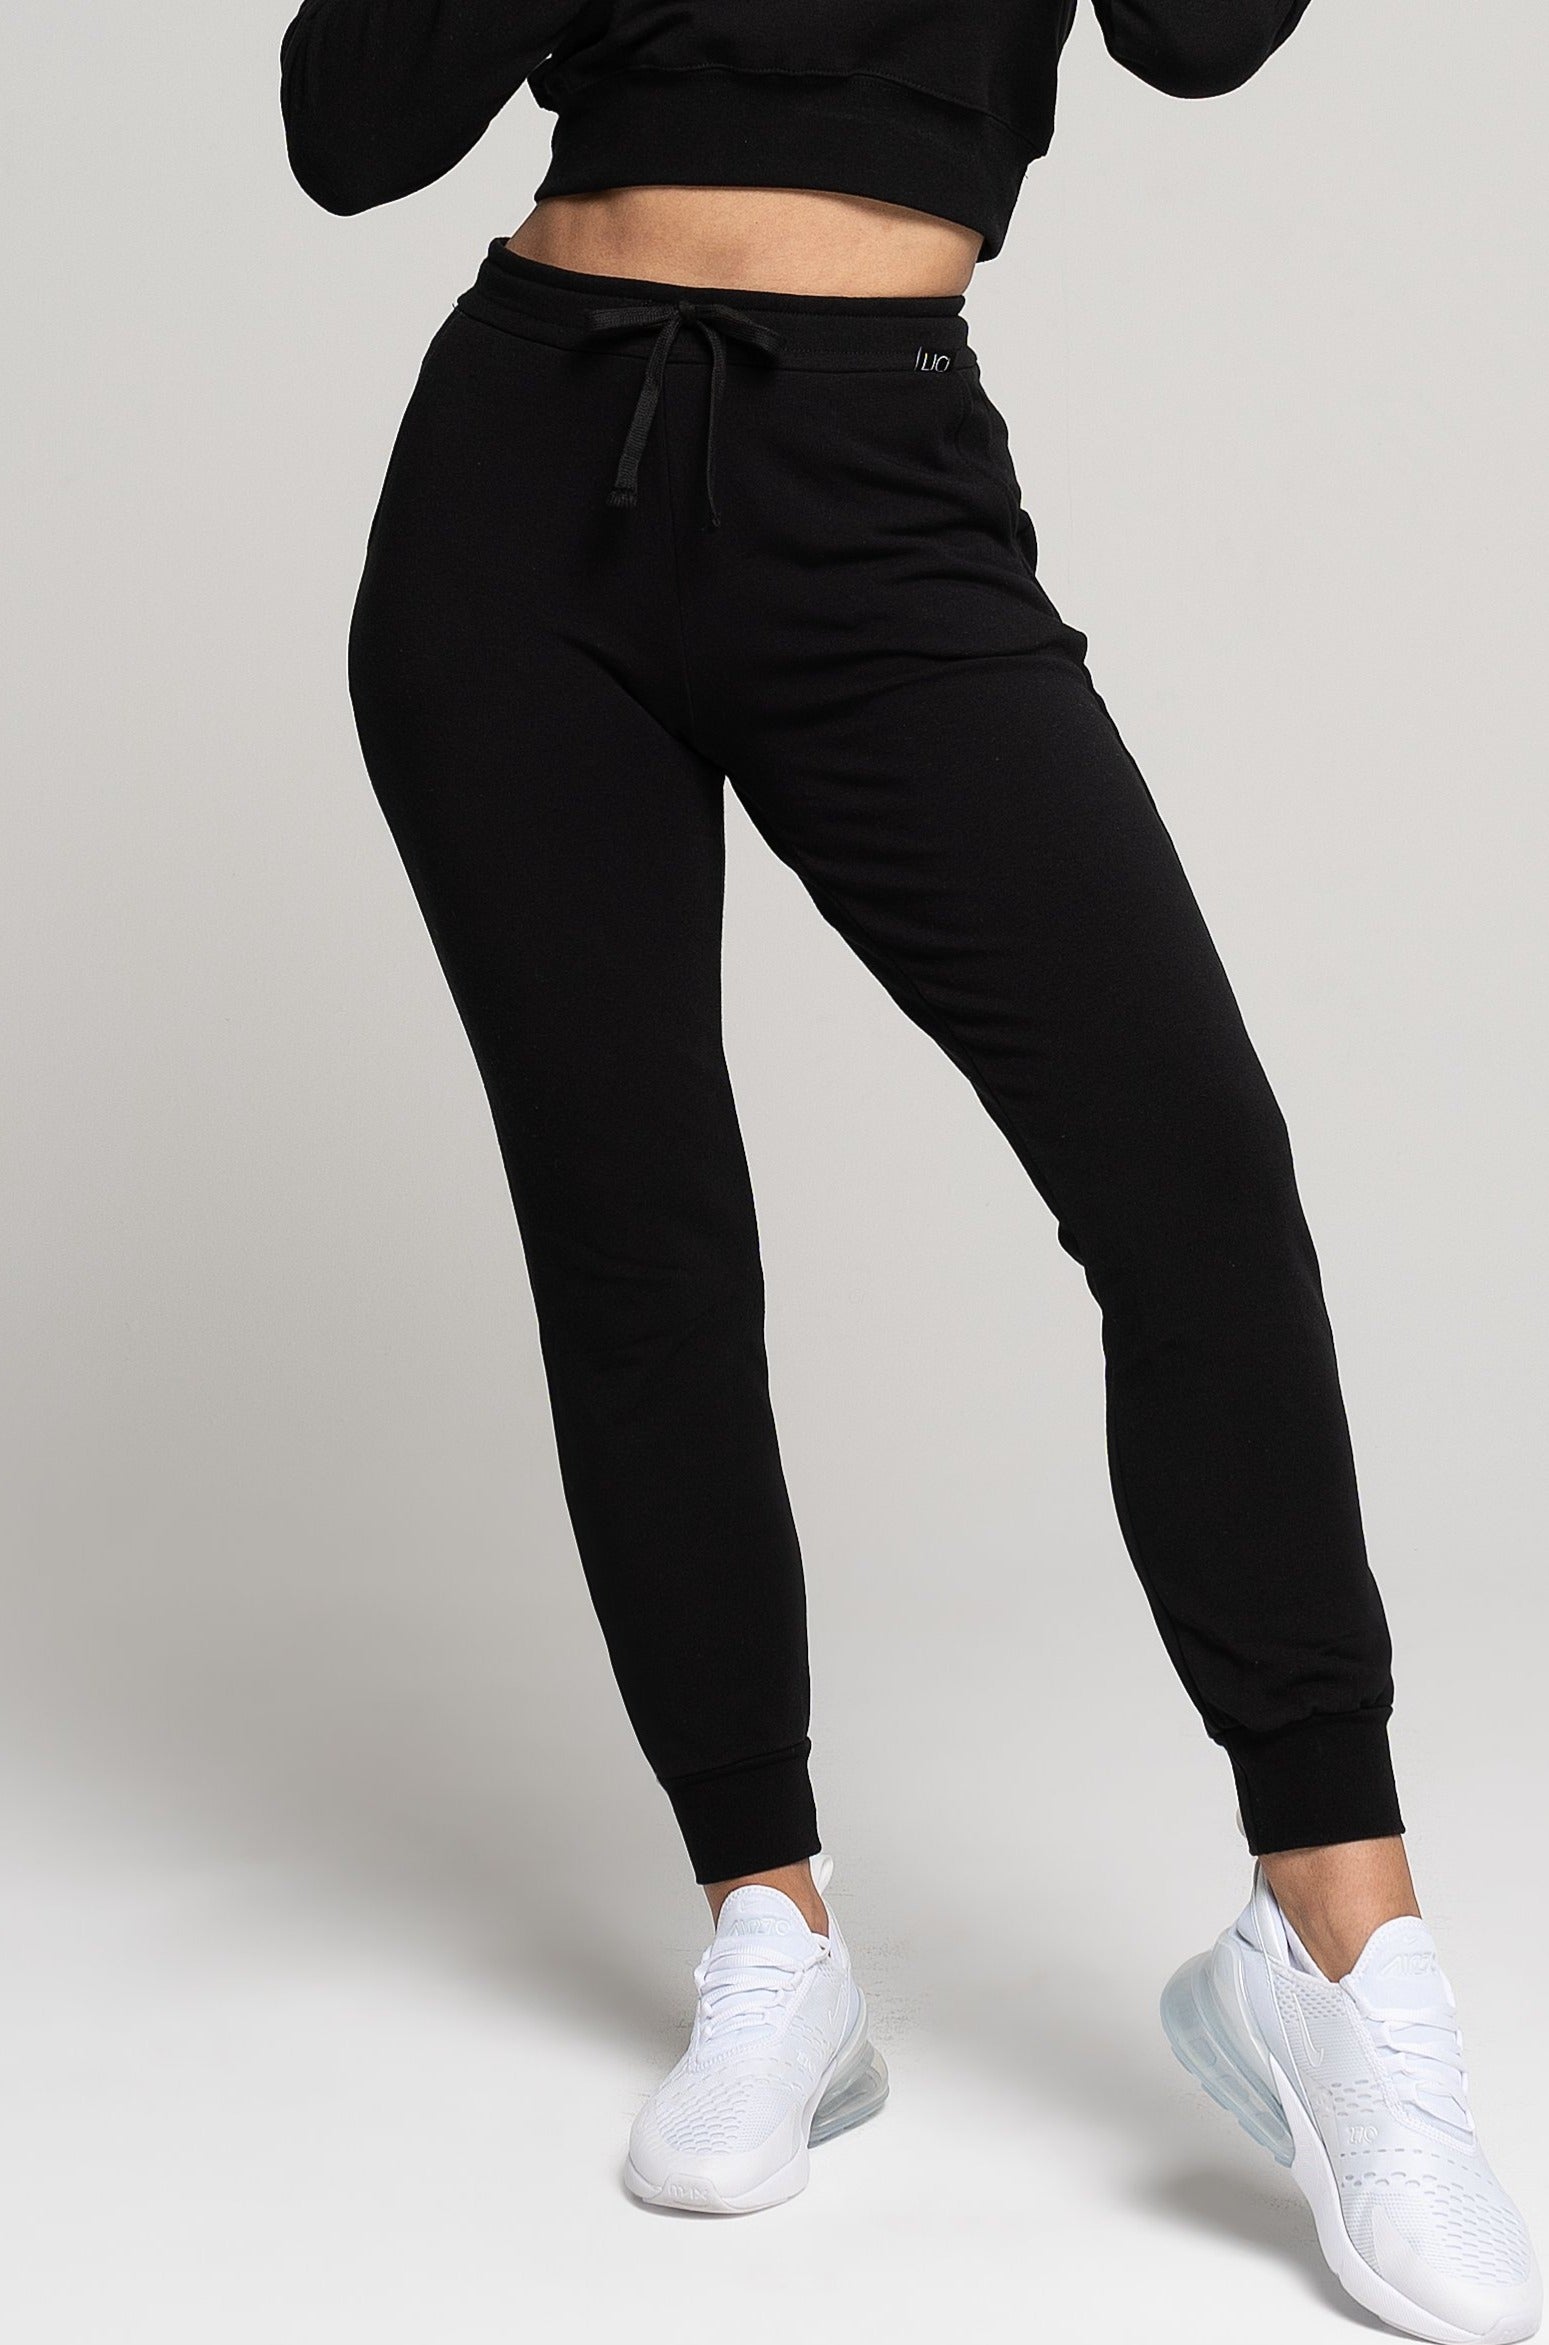 LiCi Fit Black Fitted Sweatpants